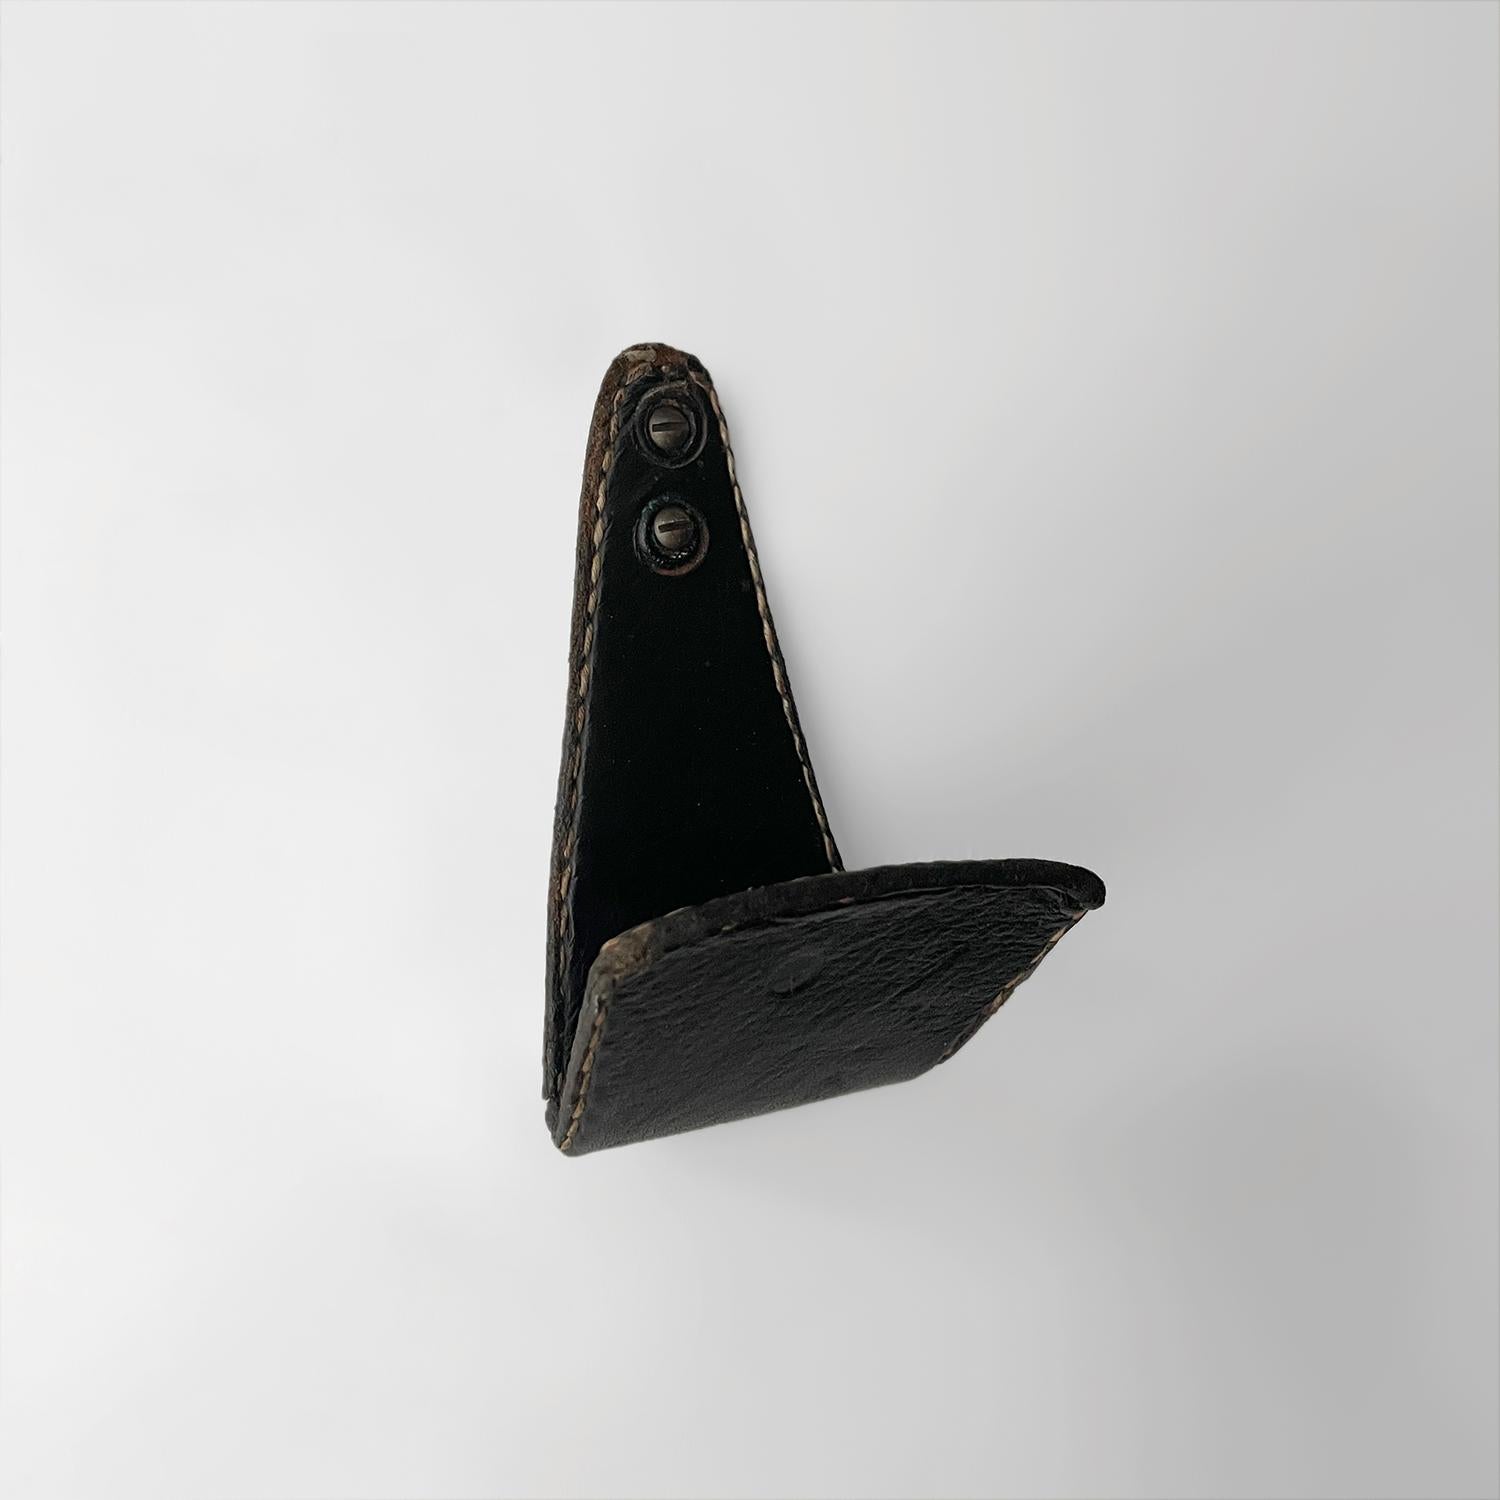 Jacques Adnet leather coat hook
France, circa 1940's 
Black leather with signature contrast stitching
Light surface markings 
Patina from age and use - please see photos
